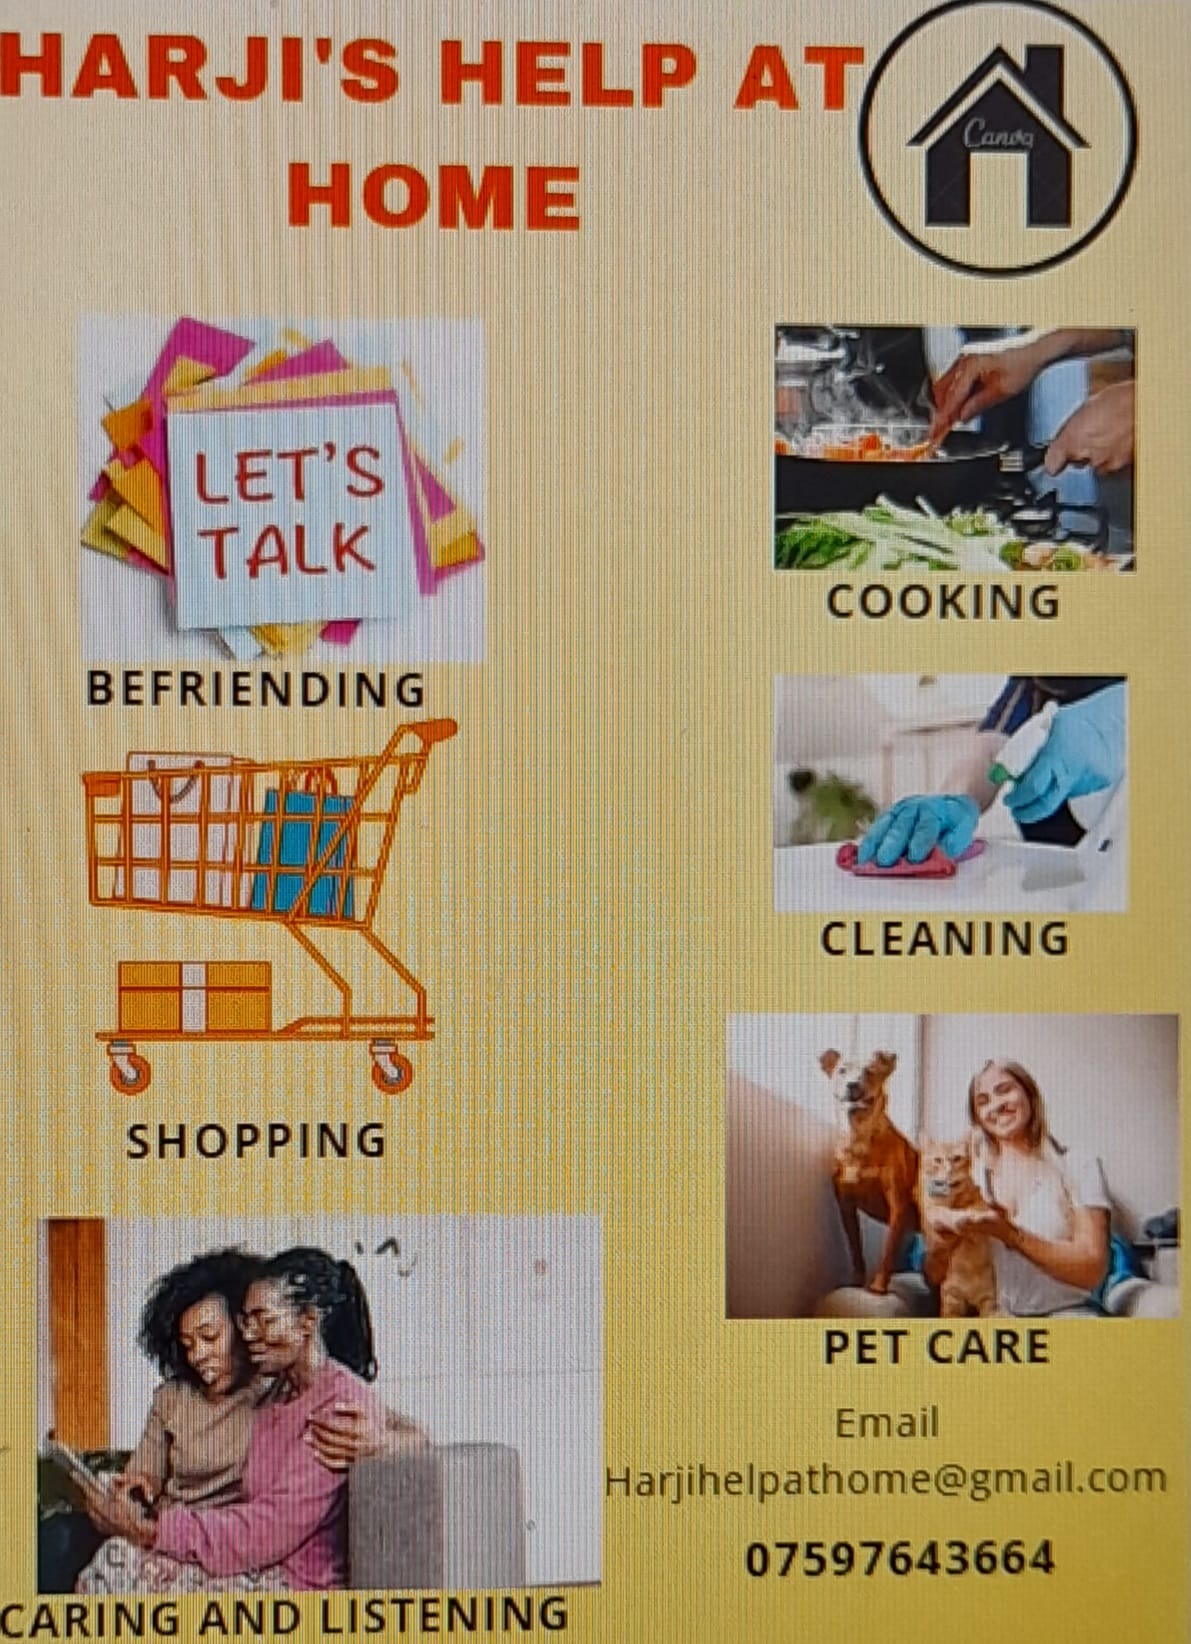 Services offered are shopping befriending cooking cleaning pet care listening